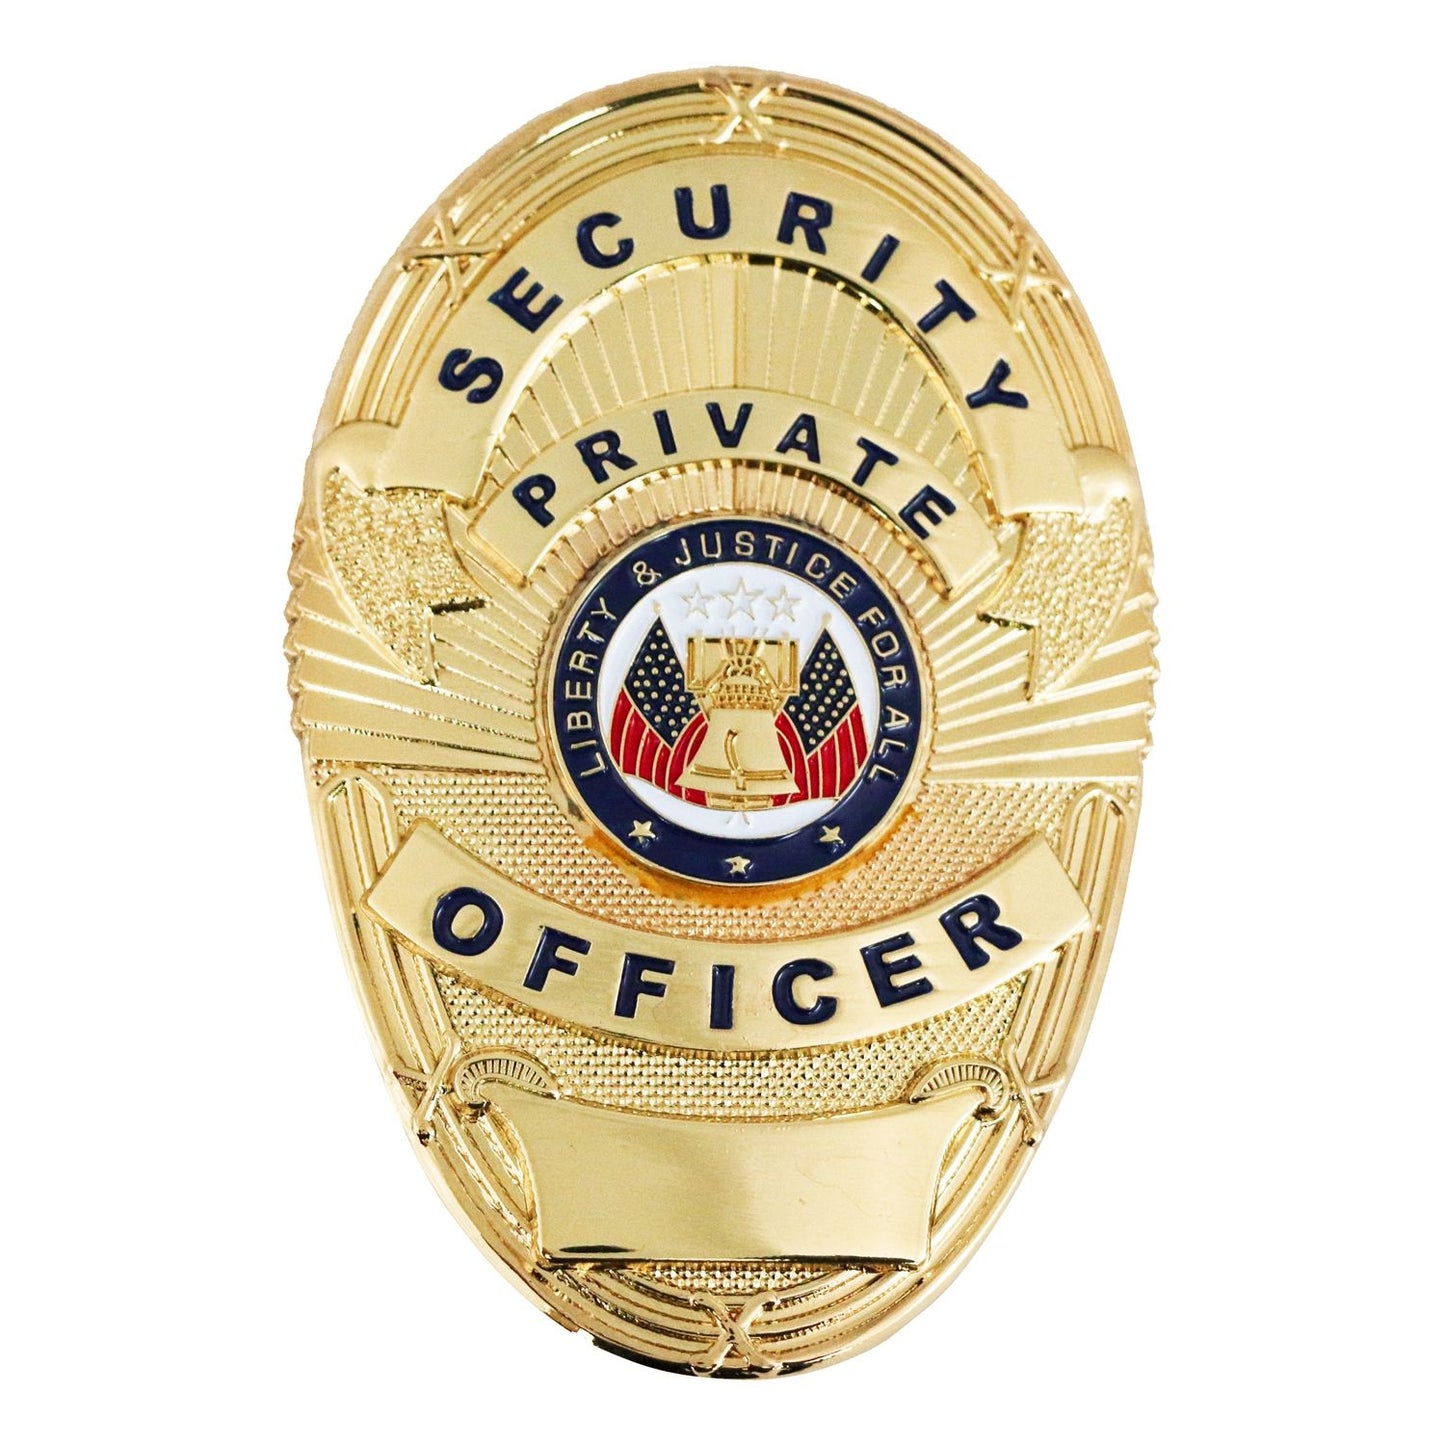 SECURITY PRIVATE OFFICER GOLD SHIELD BADGE